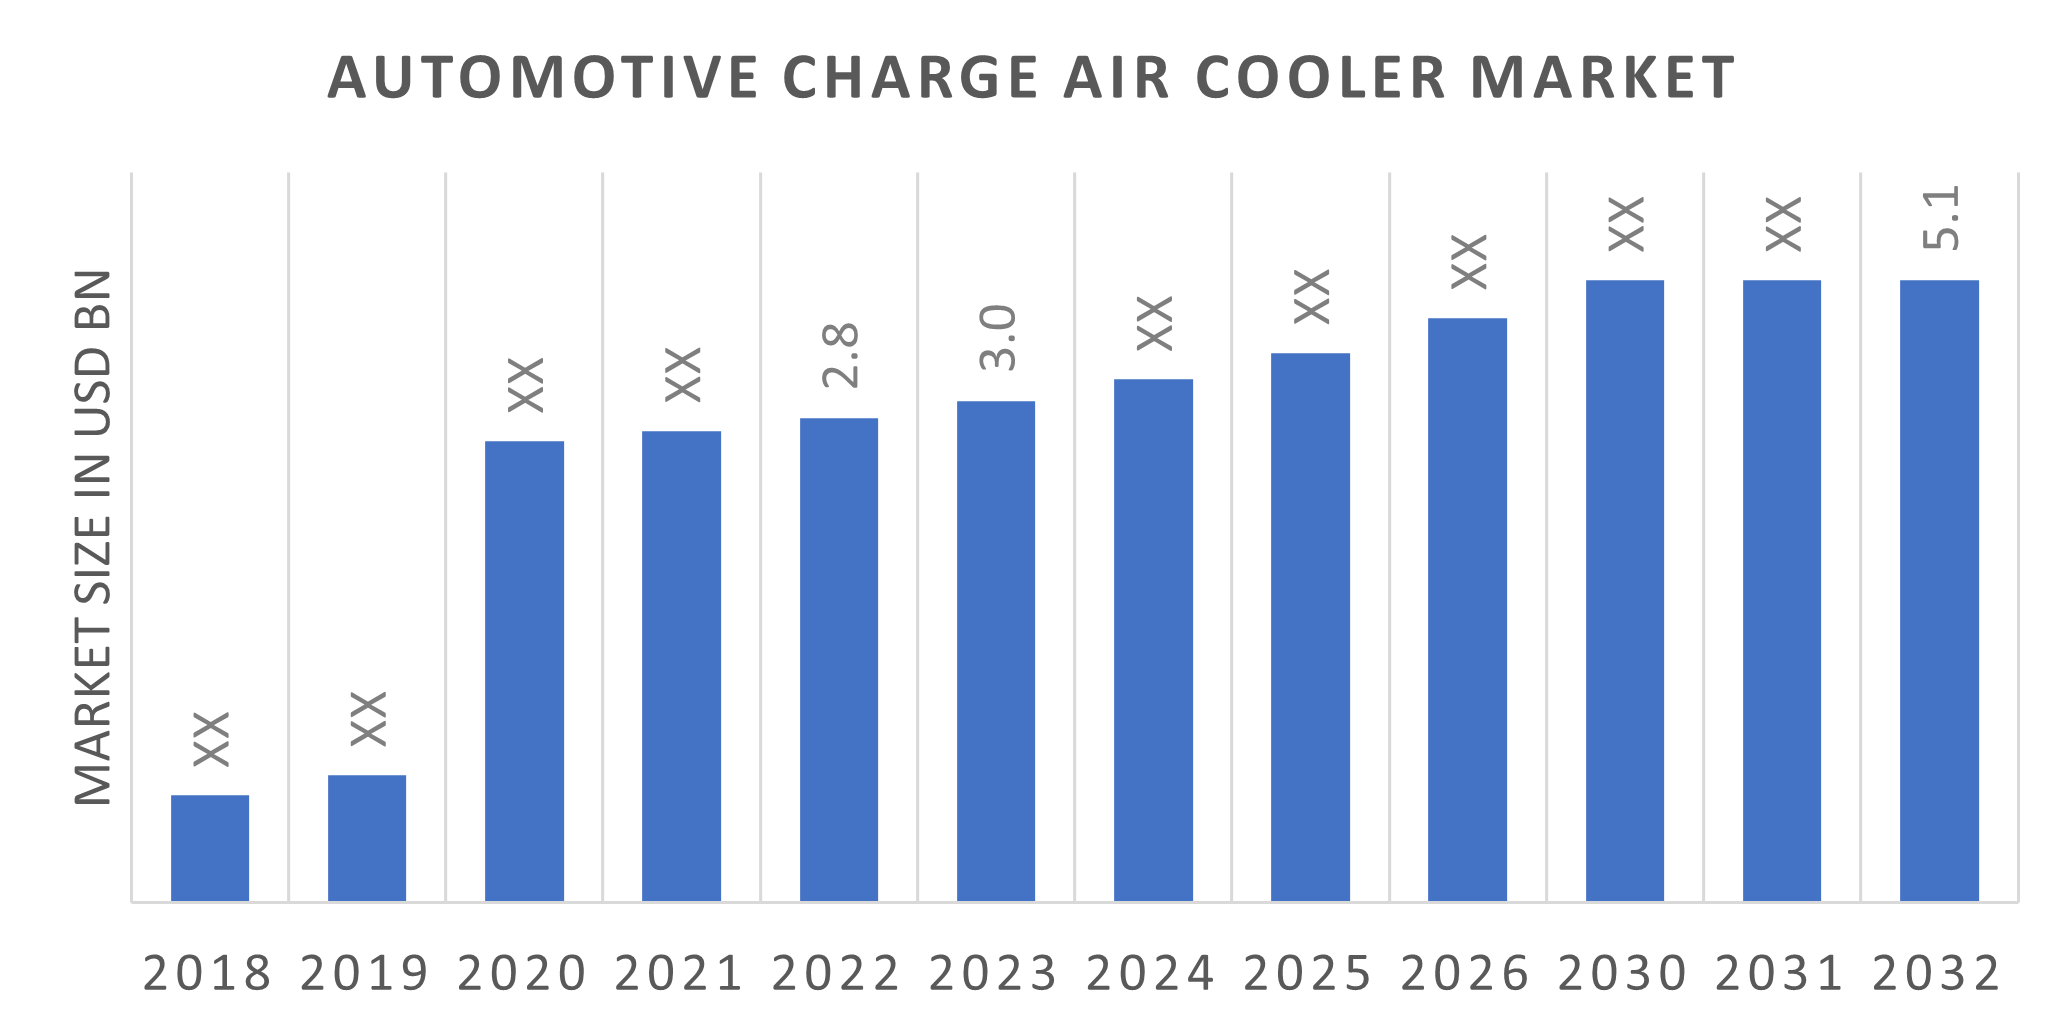 Automotive Charge Air Cooler Market Size, Share Report 2032